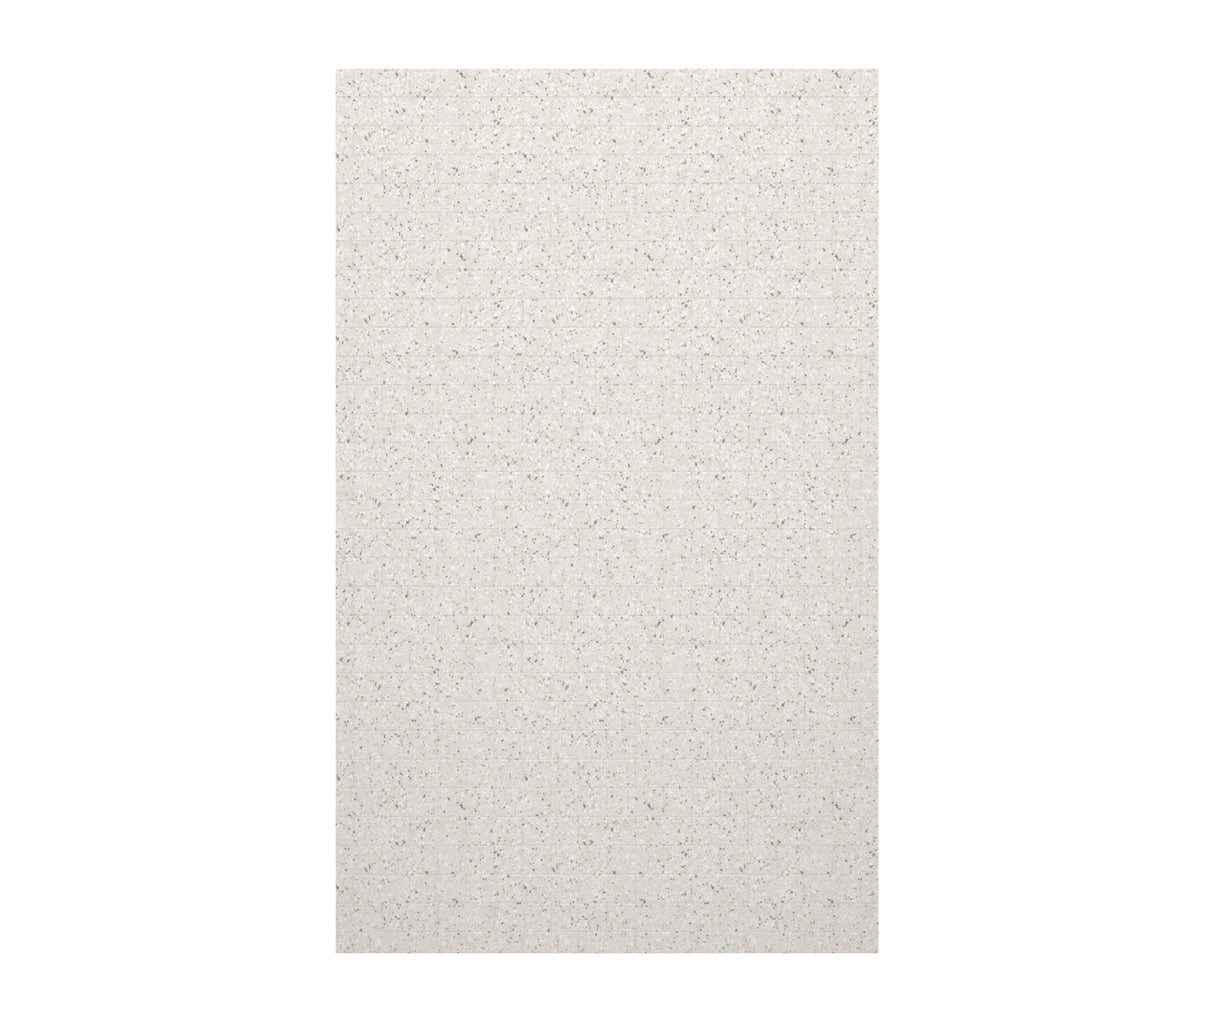 Swanstone SSST-3696-1 x 36 Swanstone Classic Subway Tile Glue up Bathtub and Shower Single Wall Panel in Bermuda Sand SSST369601.040